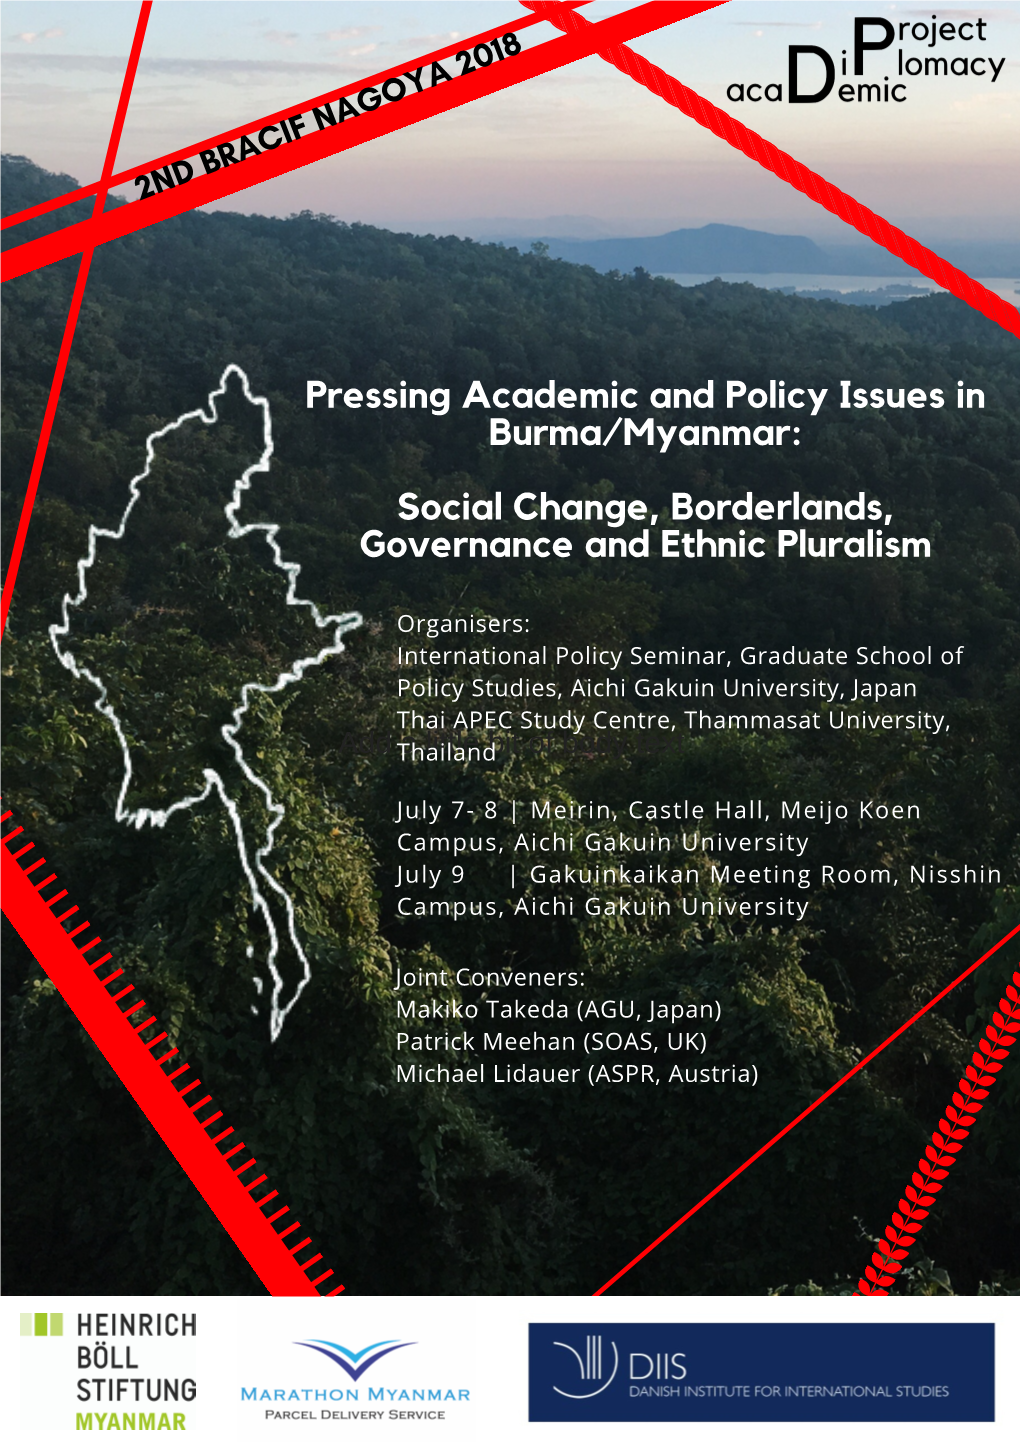 Pressing Academic and Policy Issues in Burma/Myanmar: Social Change, Borderlands, Governance and Ethnic Pluralism